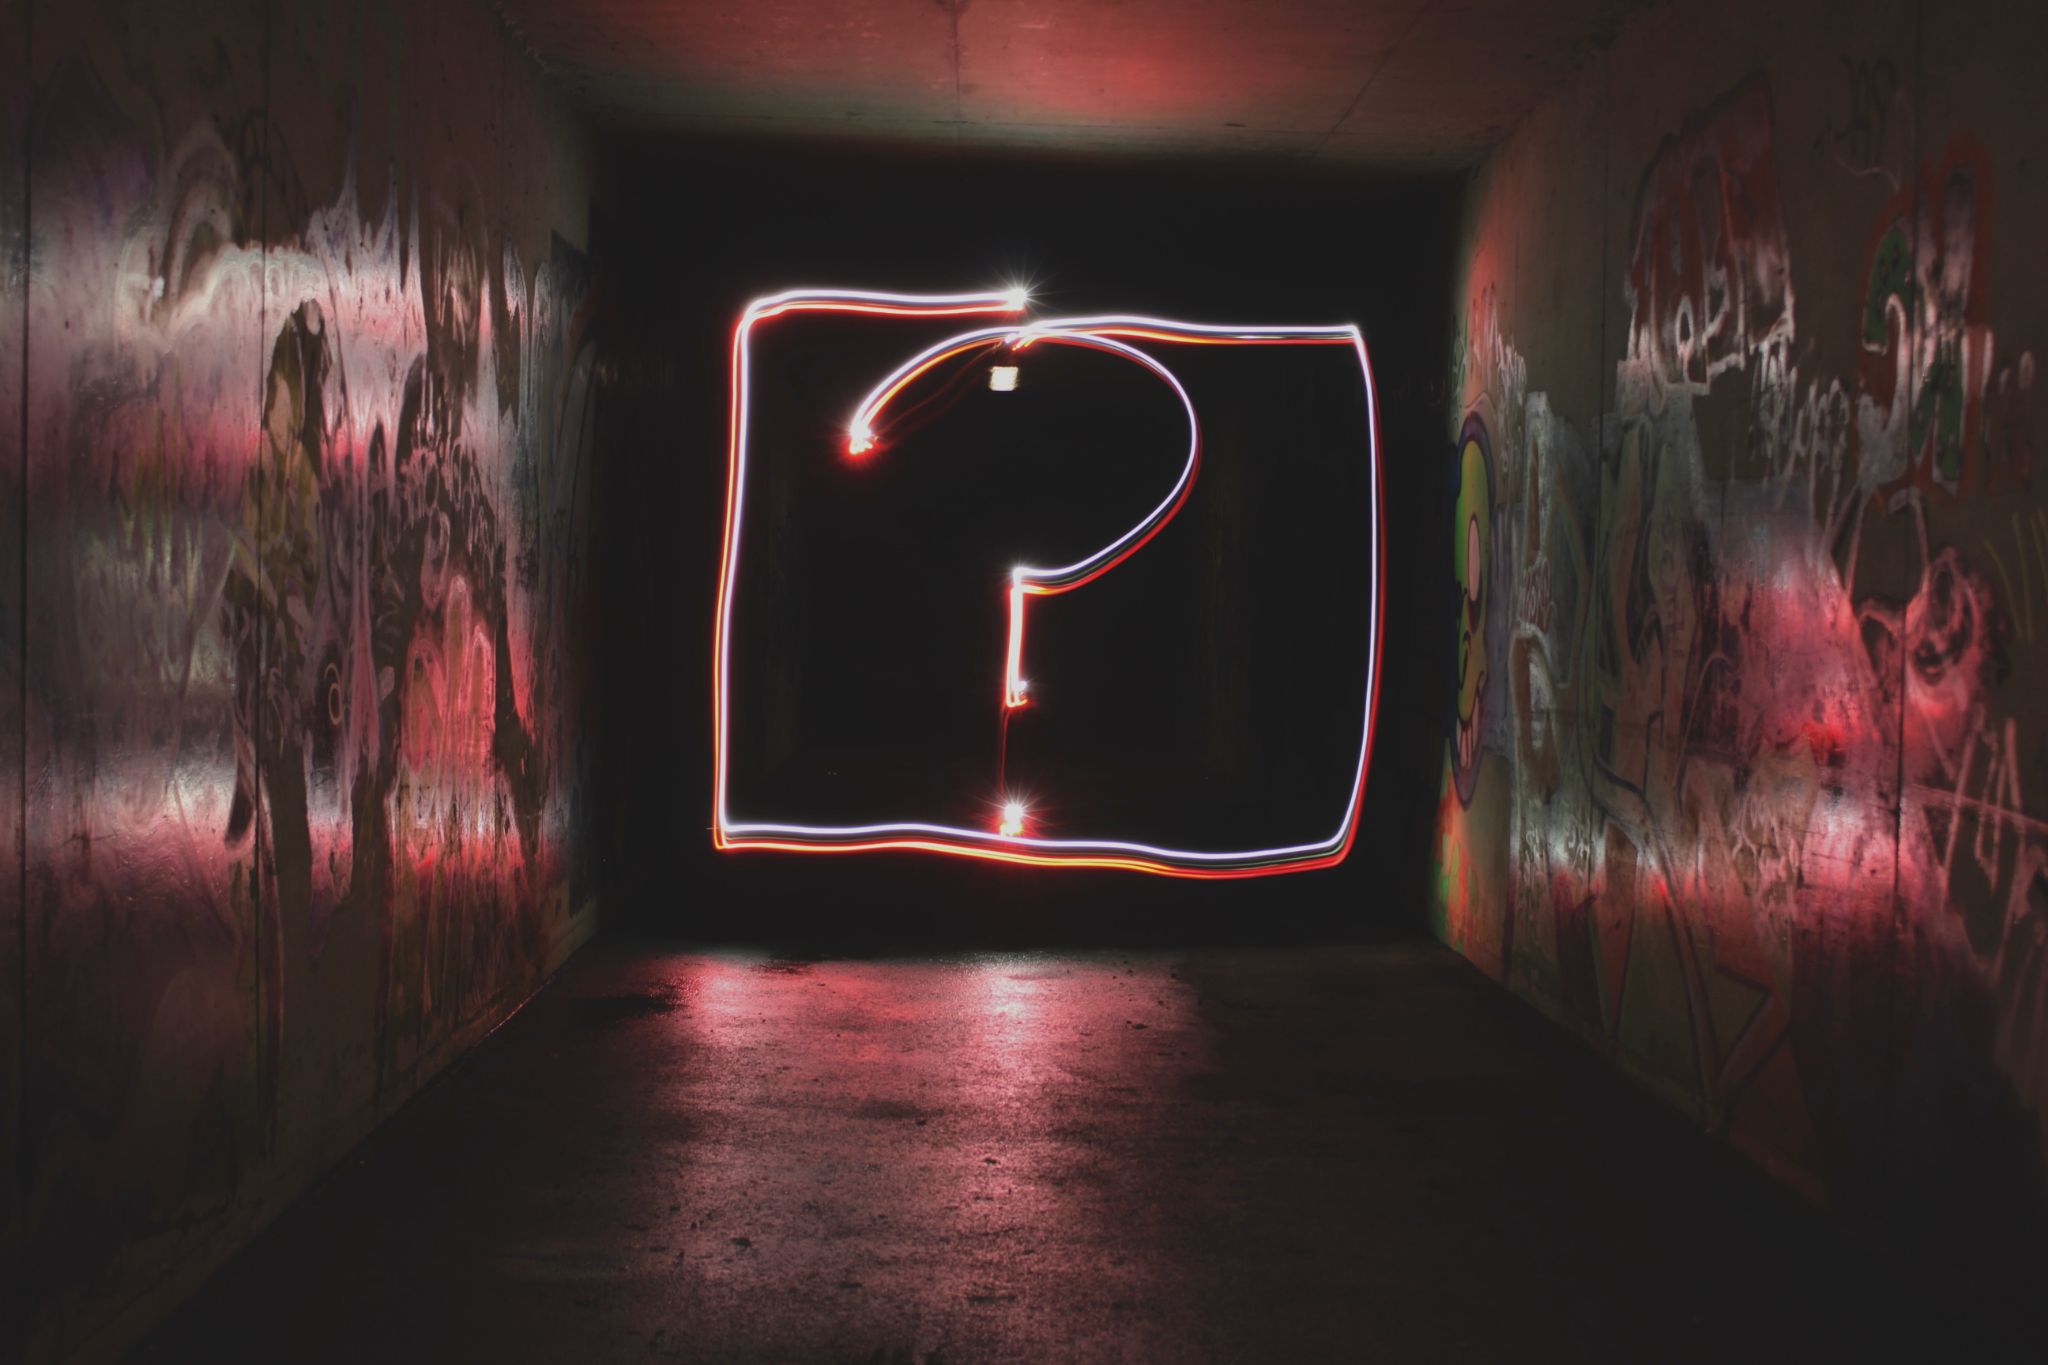 An image of a neon question mark, the representation of the phrase, "What's my point?"